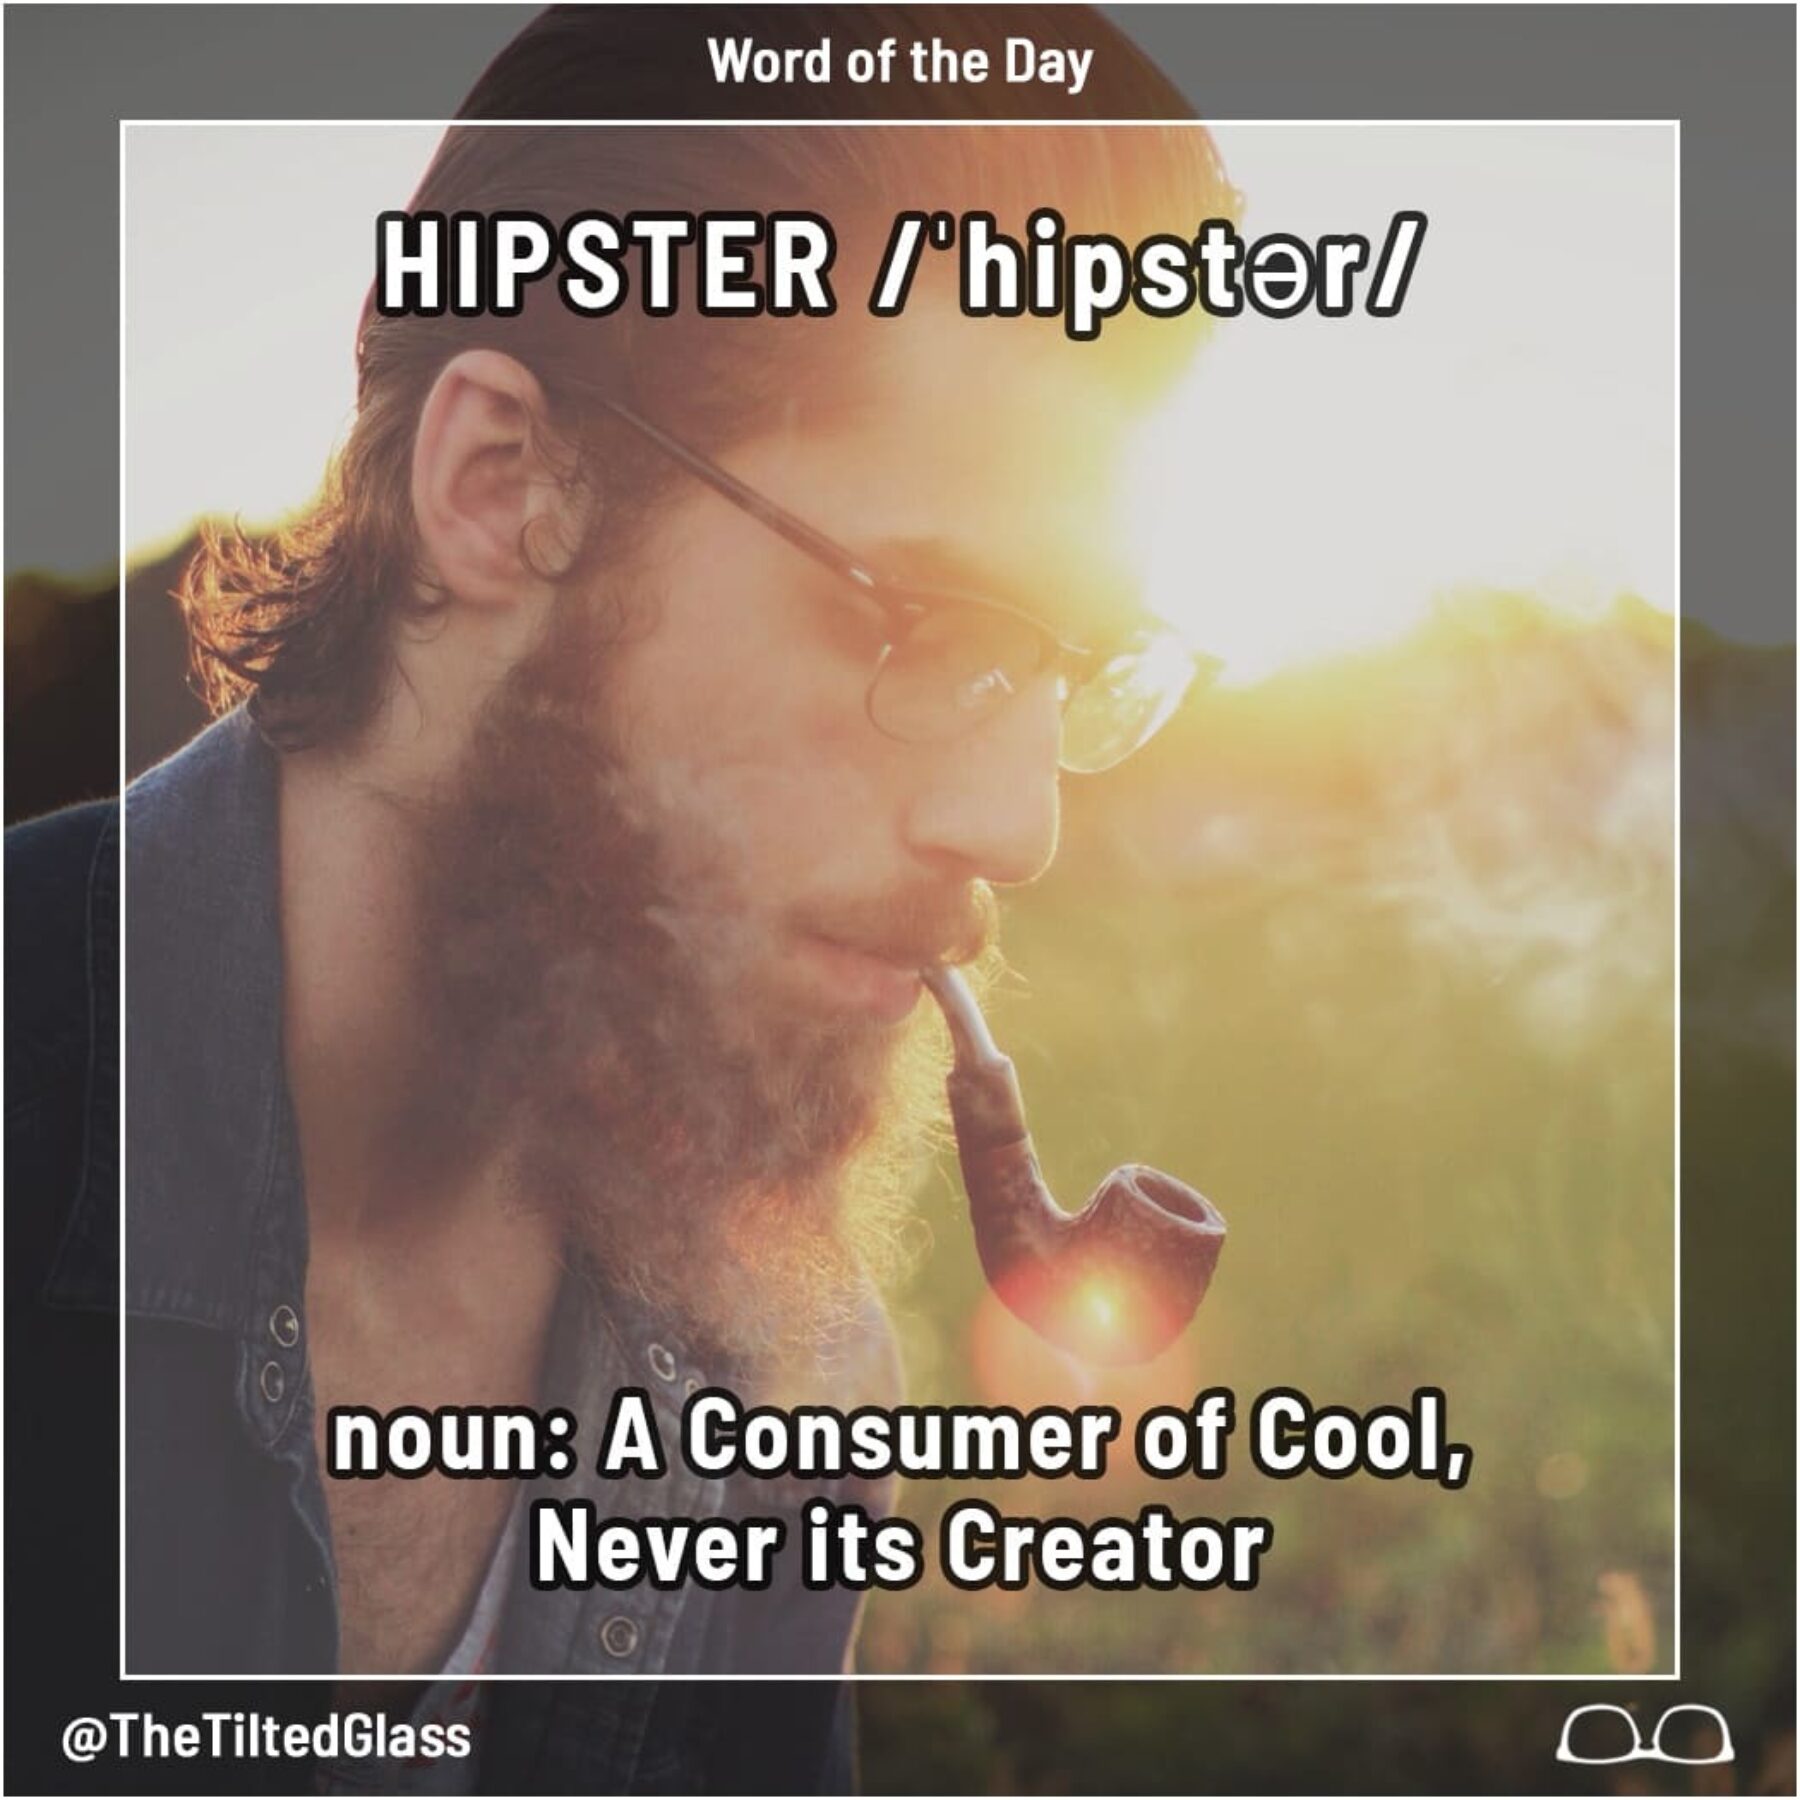 Word of the Day: Hipster